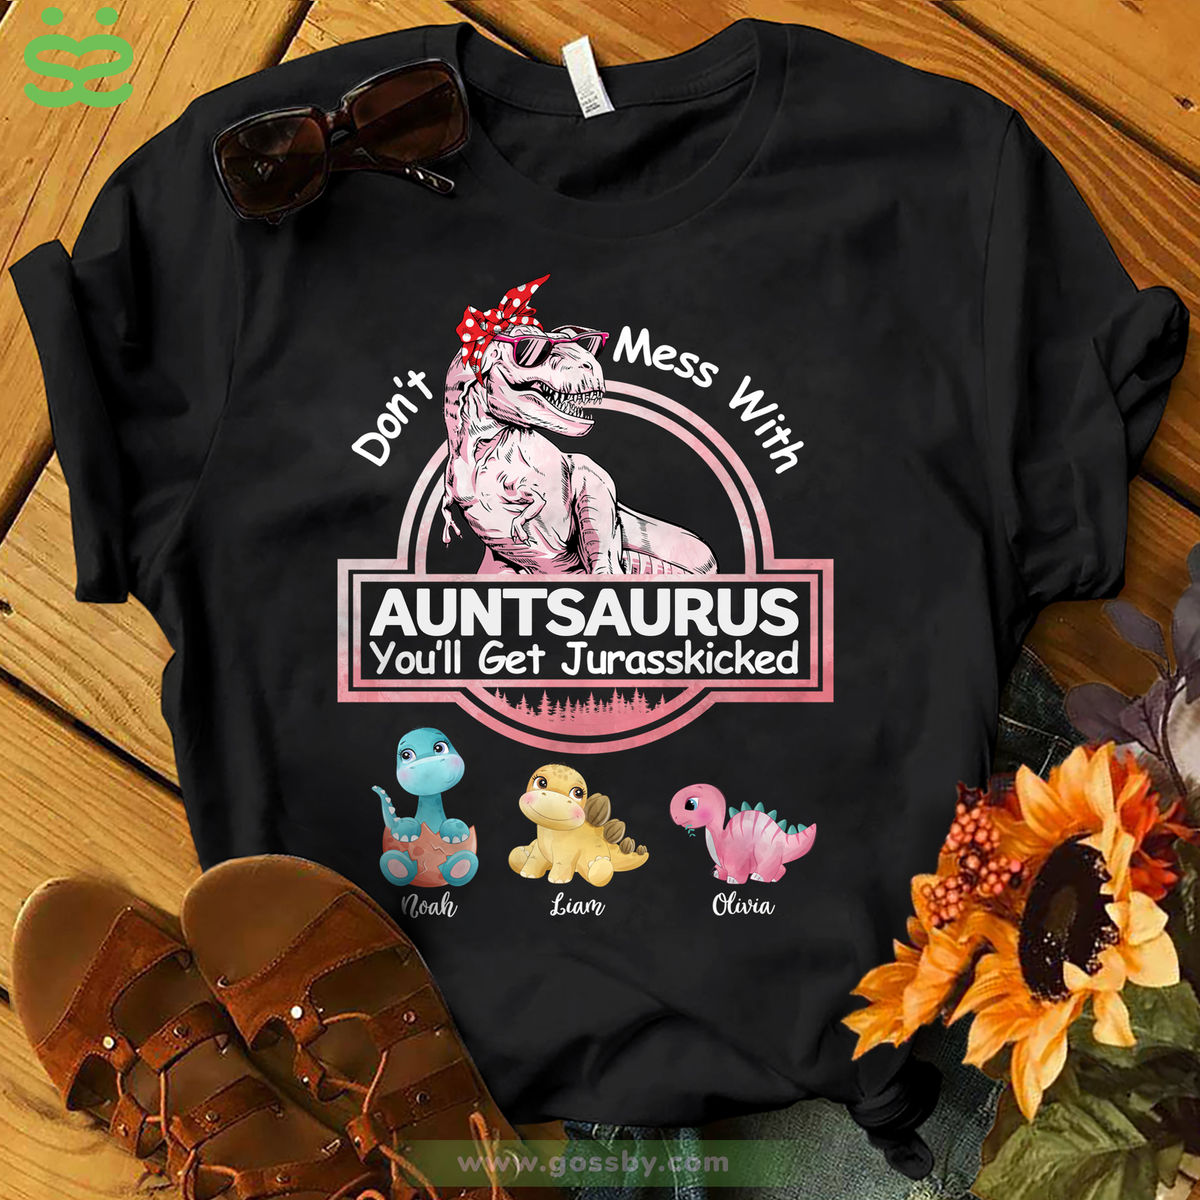 Personalized Shirt - Family - Don't Mess With Auntsaurus - Mother's Day Gifts, Gifts For Mother, Grandma, Nana, Aunt_2